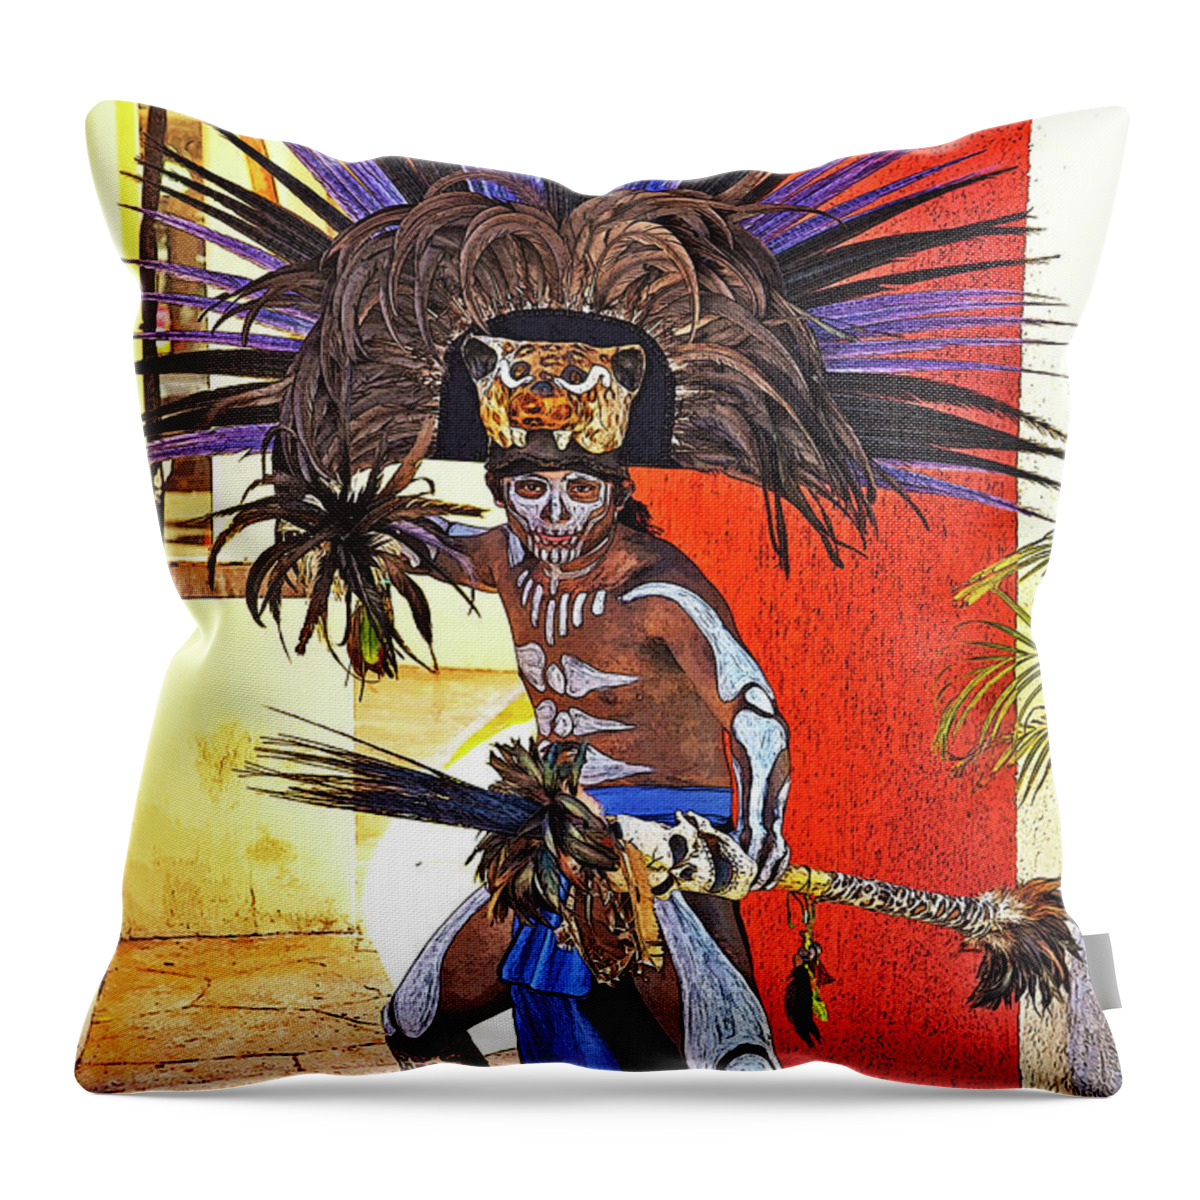 Warrior Throw Pillow featuring the photograph Standing His Ground by Pheasant Run Gallery